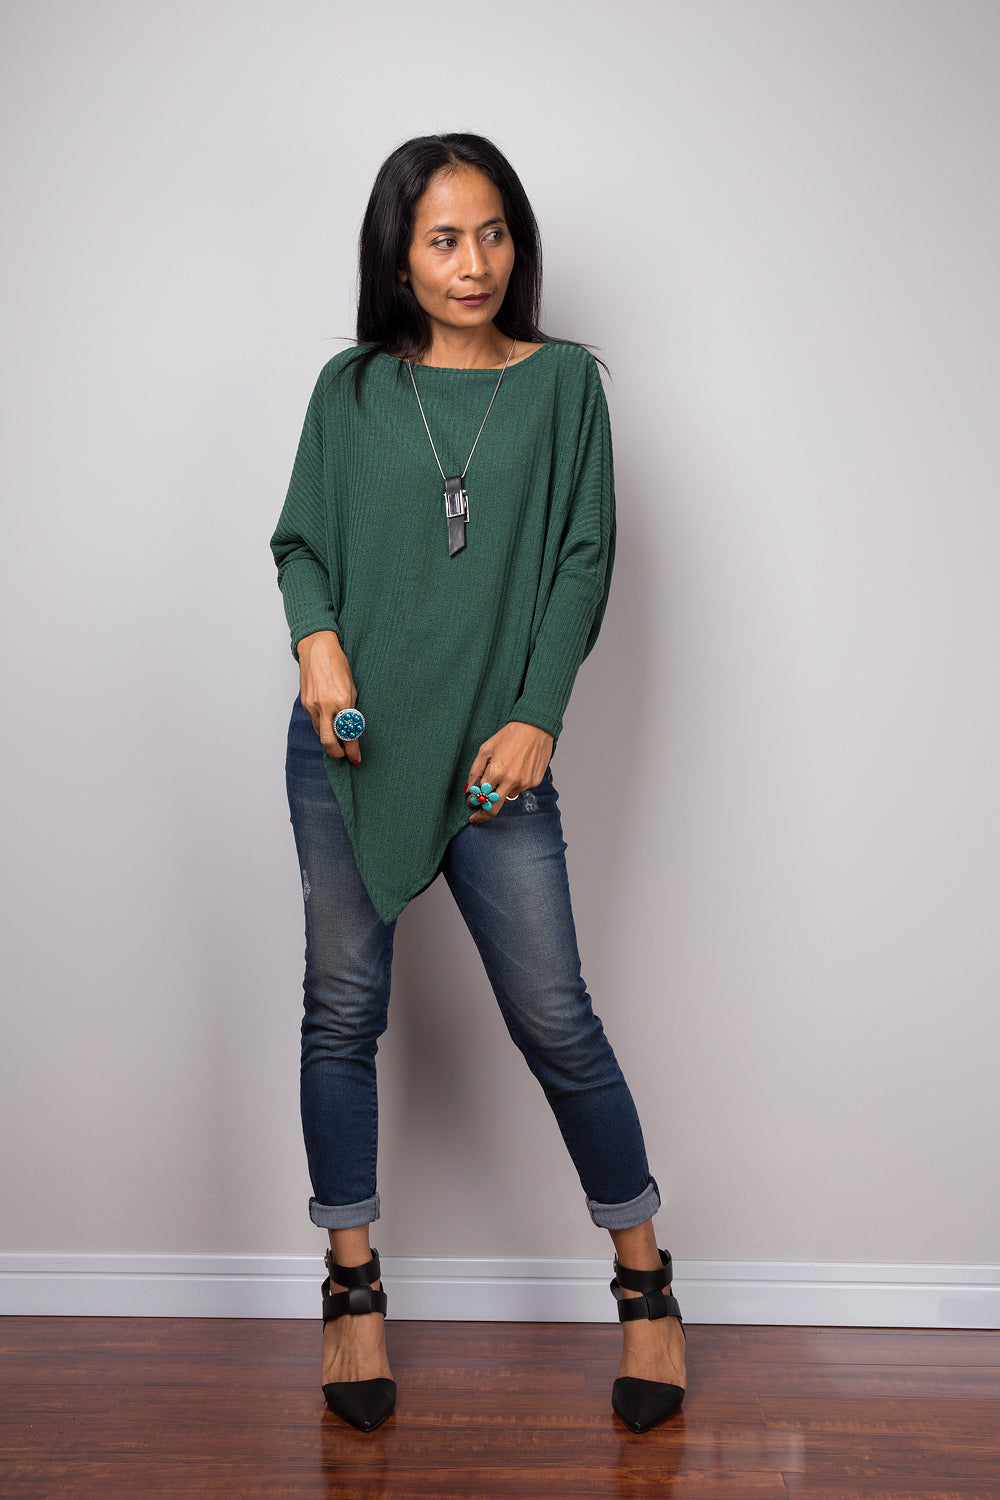 Green Sweater, Long sleeve tunic, Green Pullover, Poncho sweater, Green top, Sweater women, knit sweater, pullover sweater